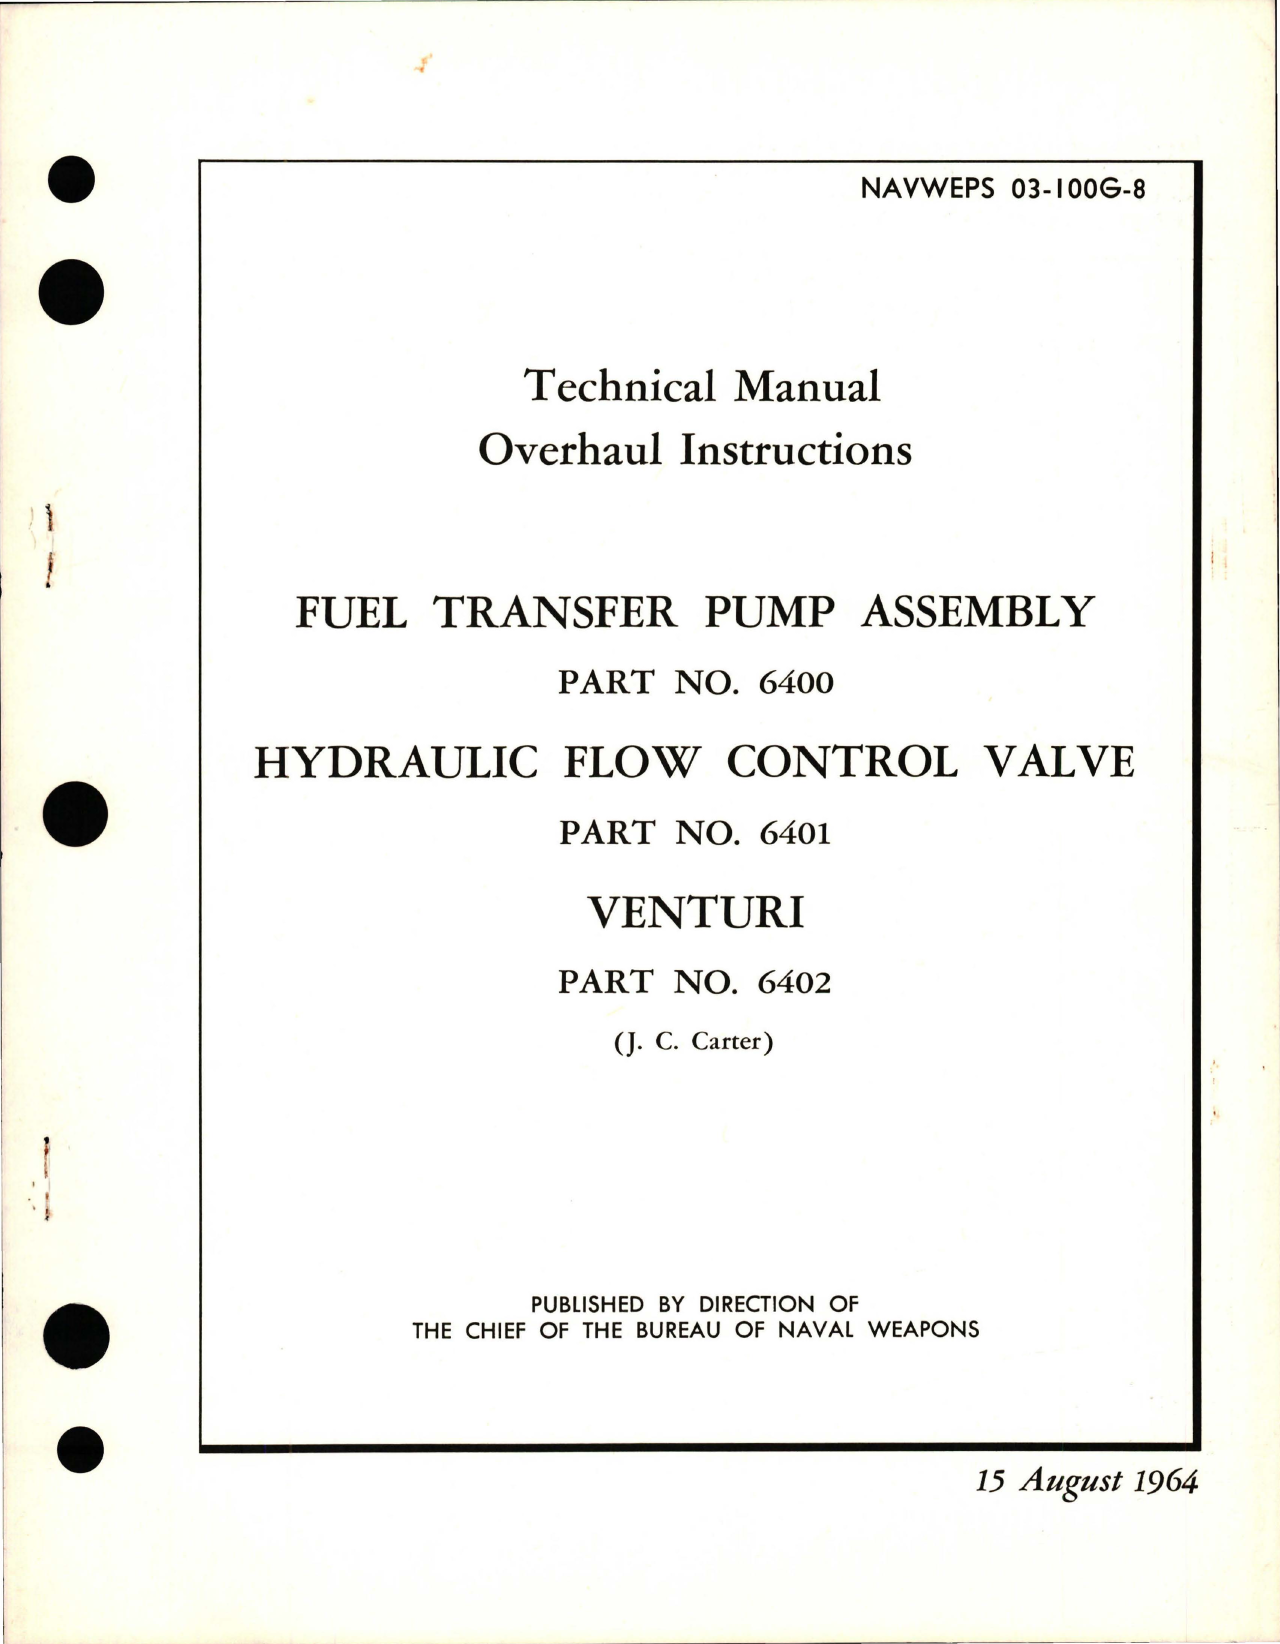 Sample page 1 from AirCorps Library document: Overhaul Instructions for Fuel Transfer Pump Assembly, Hydraulic Flow Control Valve, and Venturi 